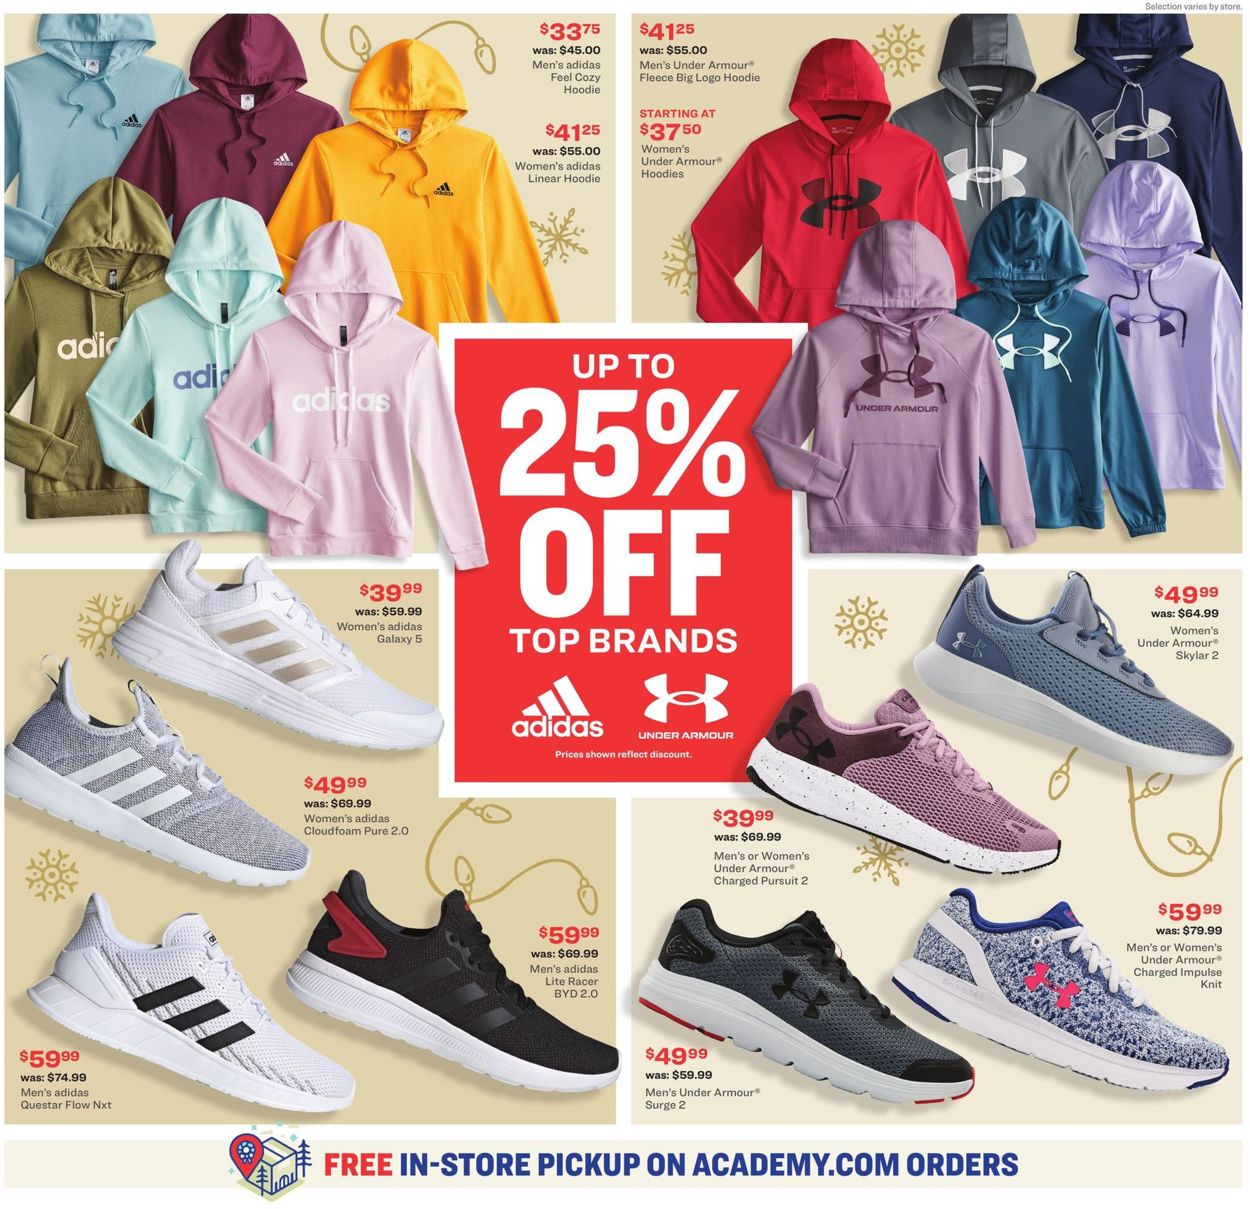 Academy Sports Ad from 12/20/2021